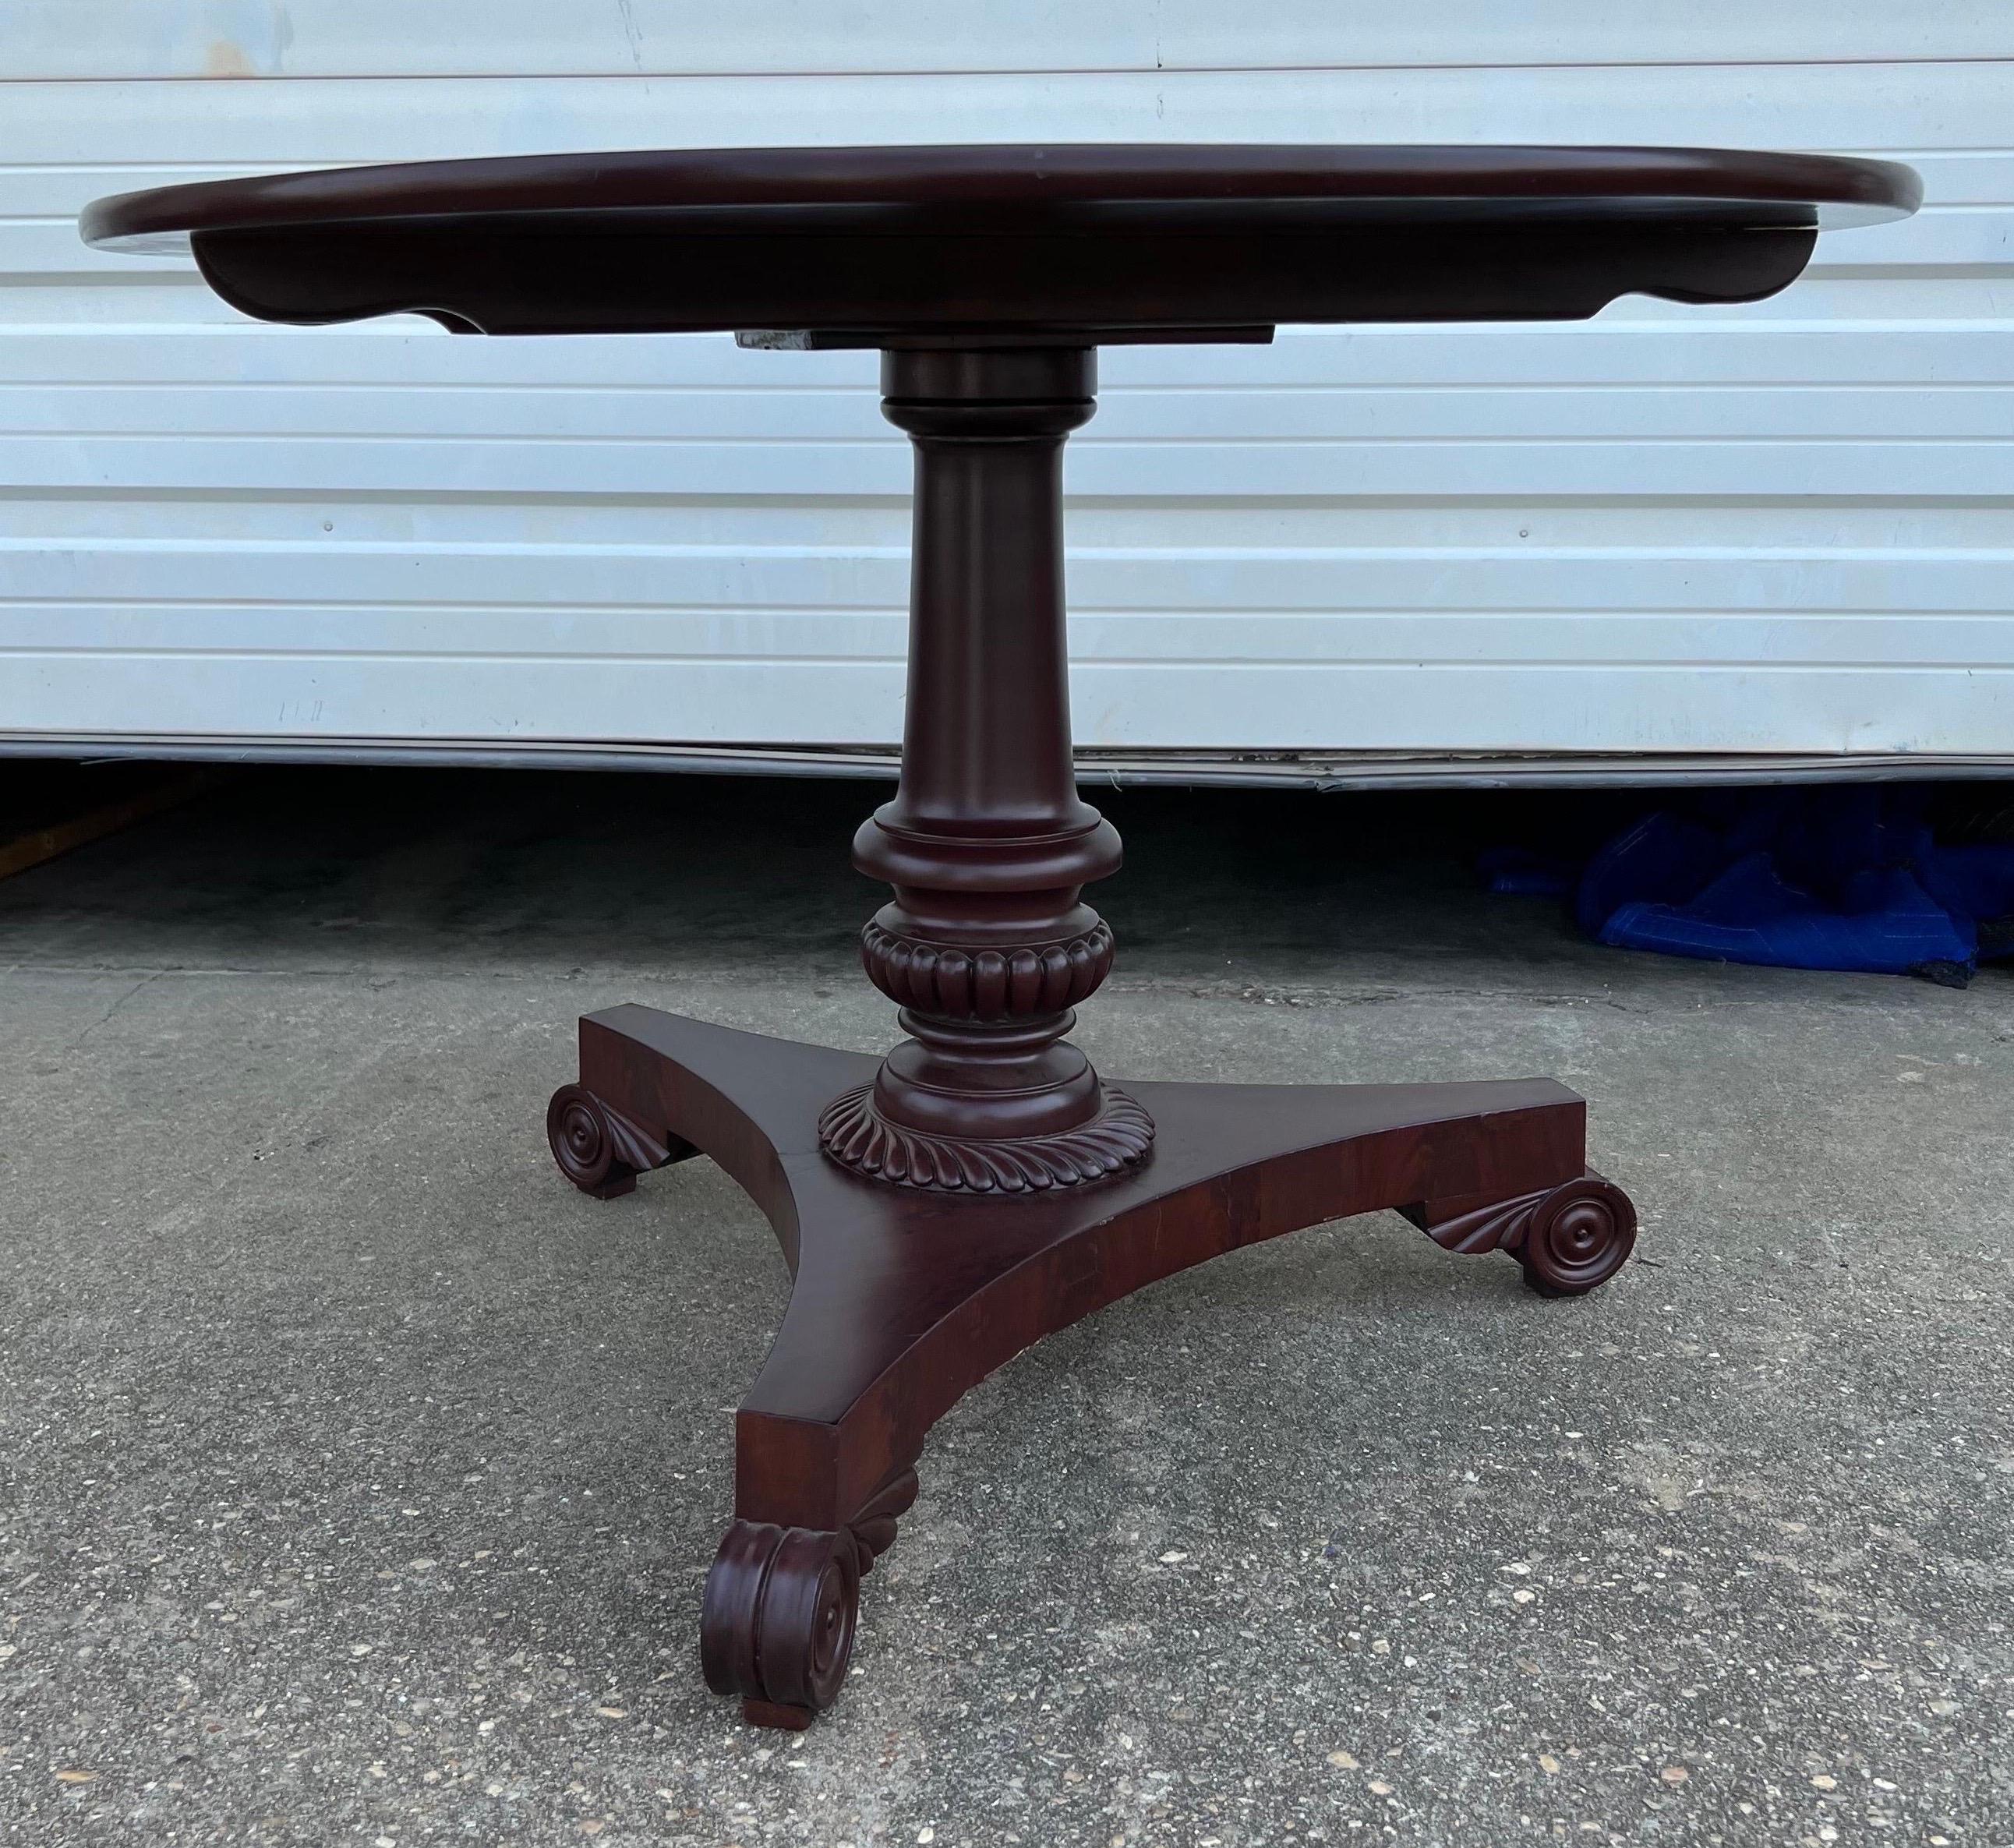 Great little 19th century English regency mahogany center table. 28” high, pillar with gadrooned base over three classic regency feet.